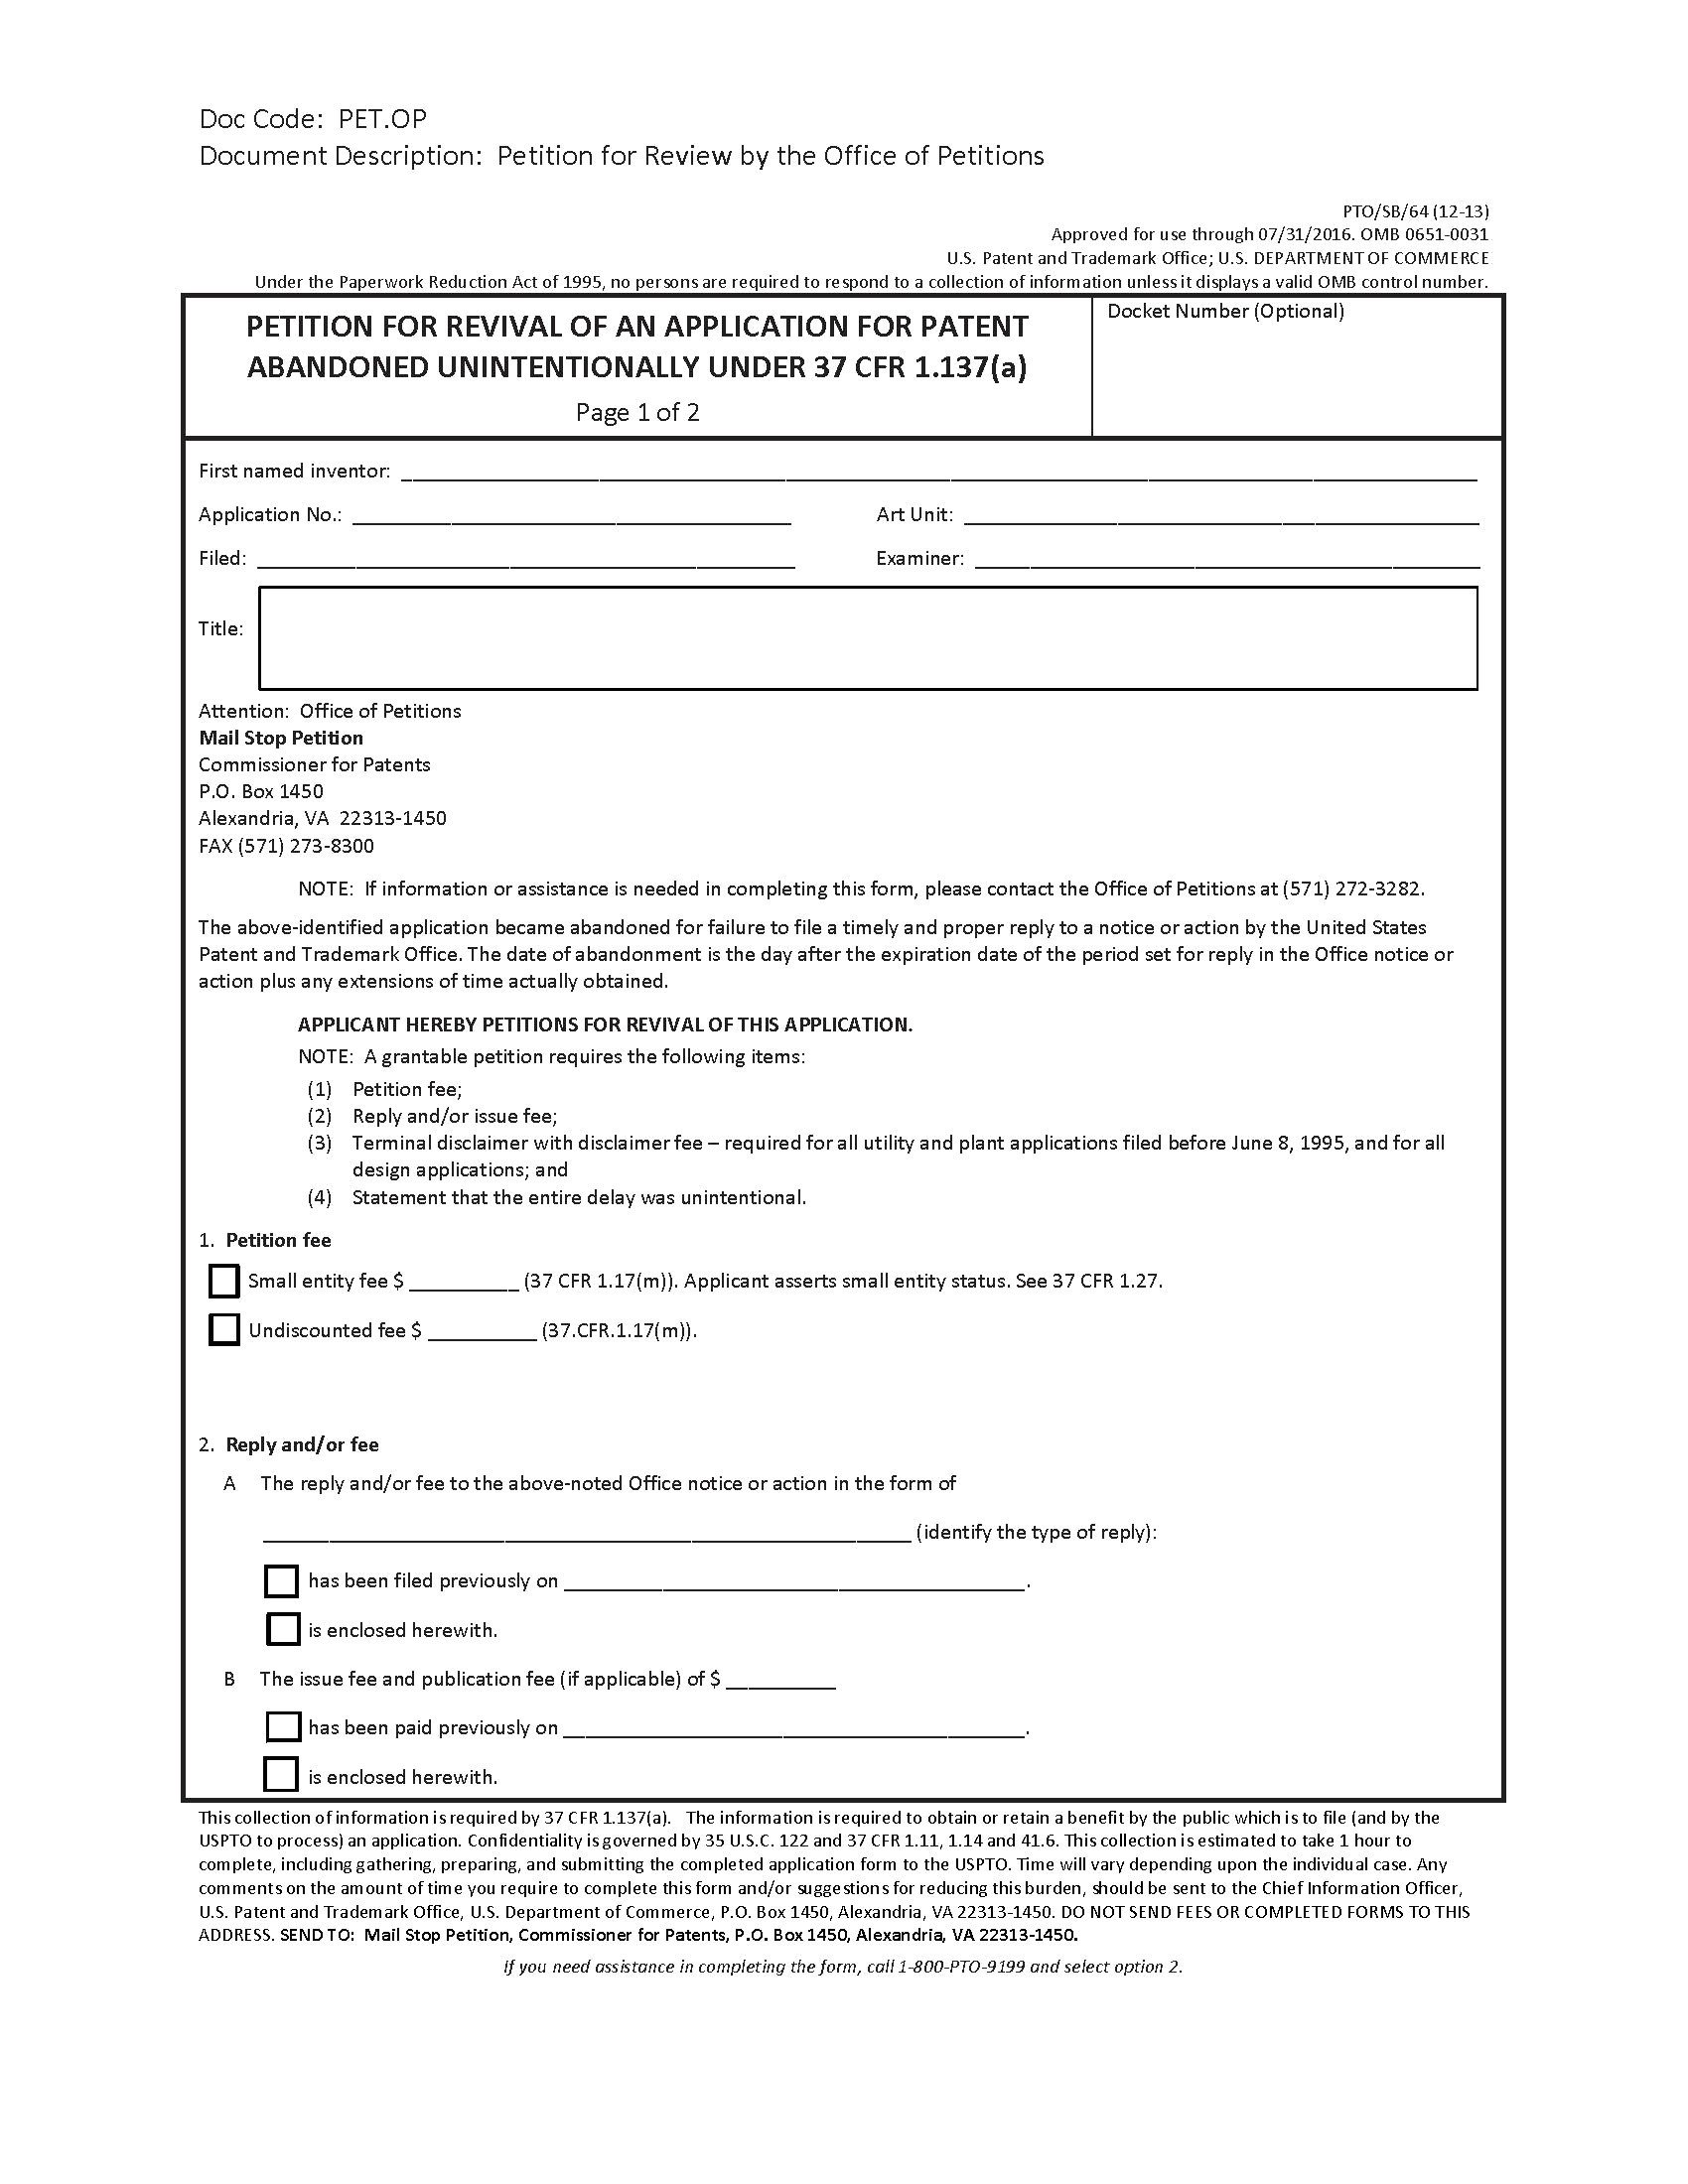 patent proposal template inspirational provisional patent application template free pccc